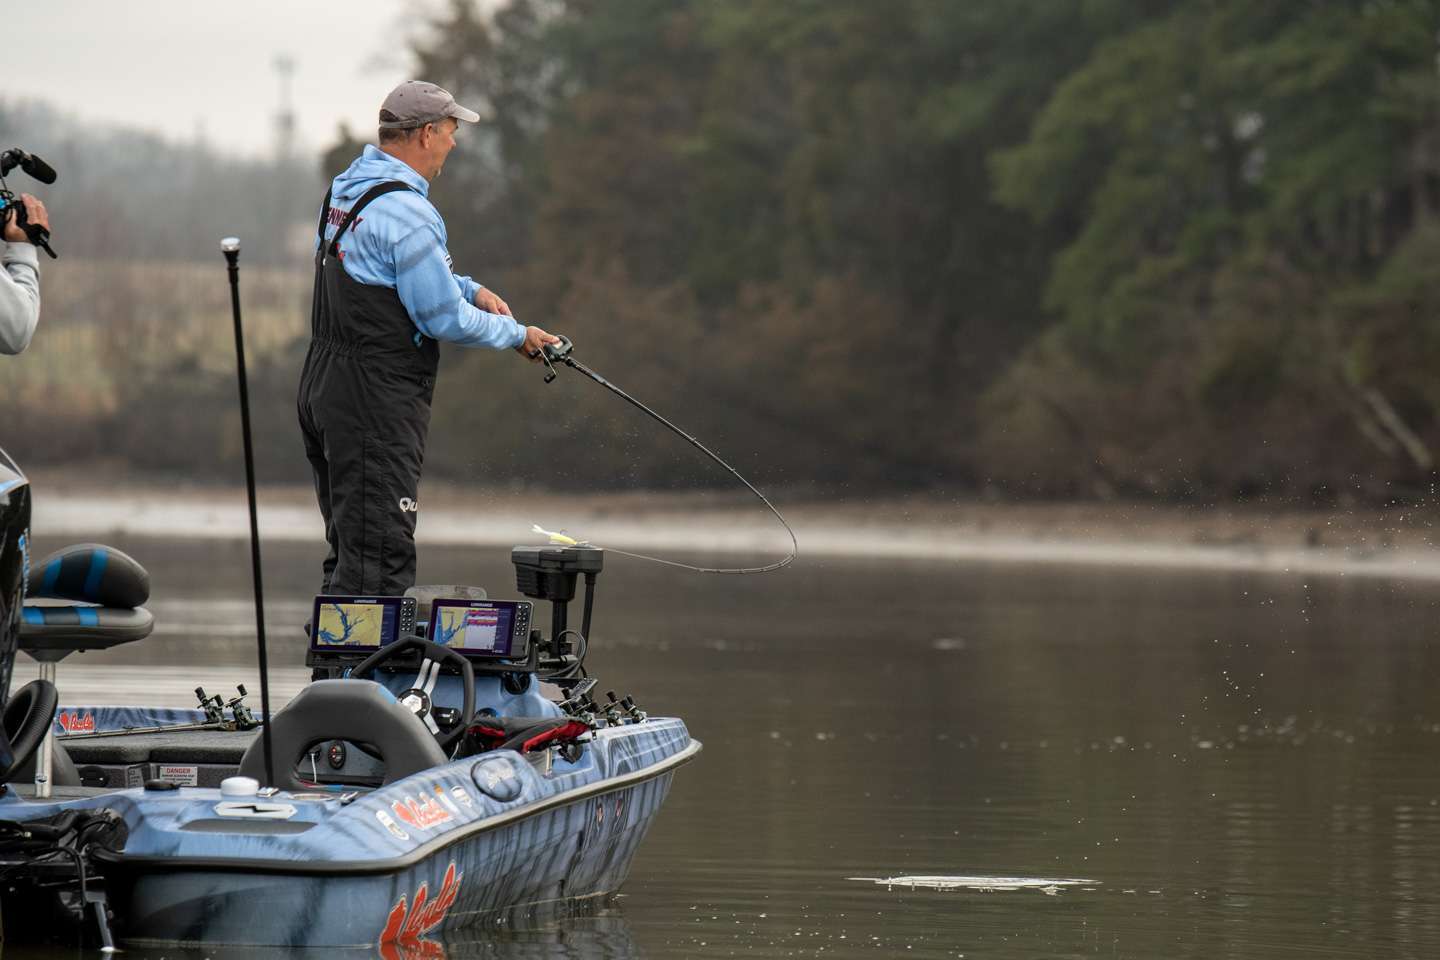 <b>Steve Kennedy (2nd; 55-15) </b><br>
Staging bass were the catch for Steve Kennedy, a bladed jig and skirted jig doing the trick on the Tennessee River. 
